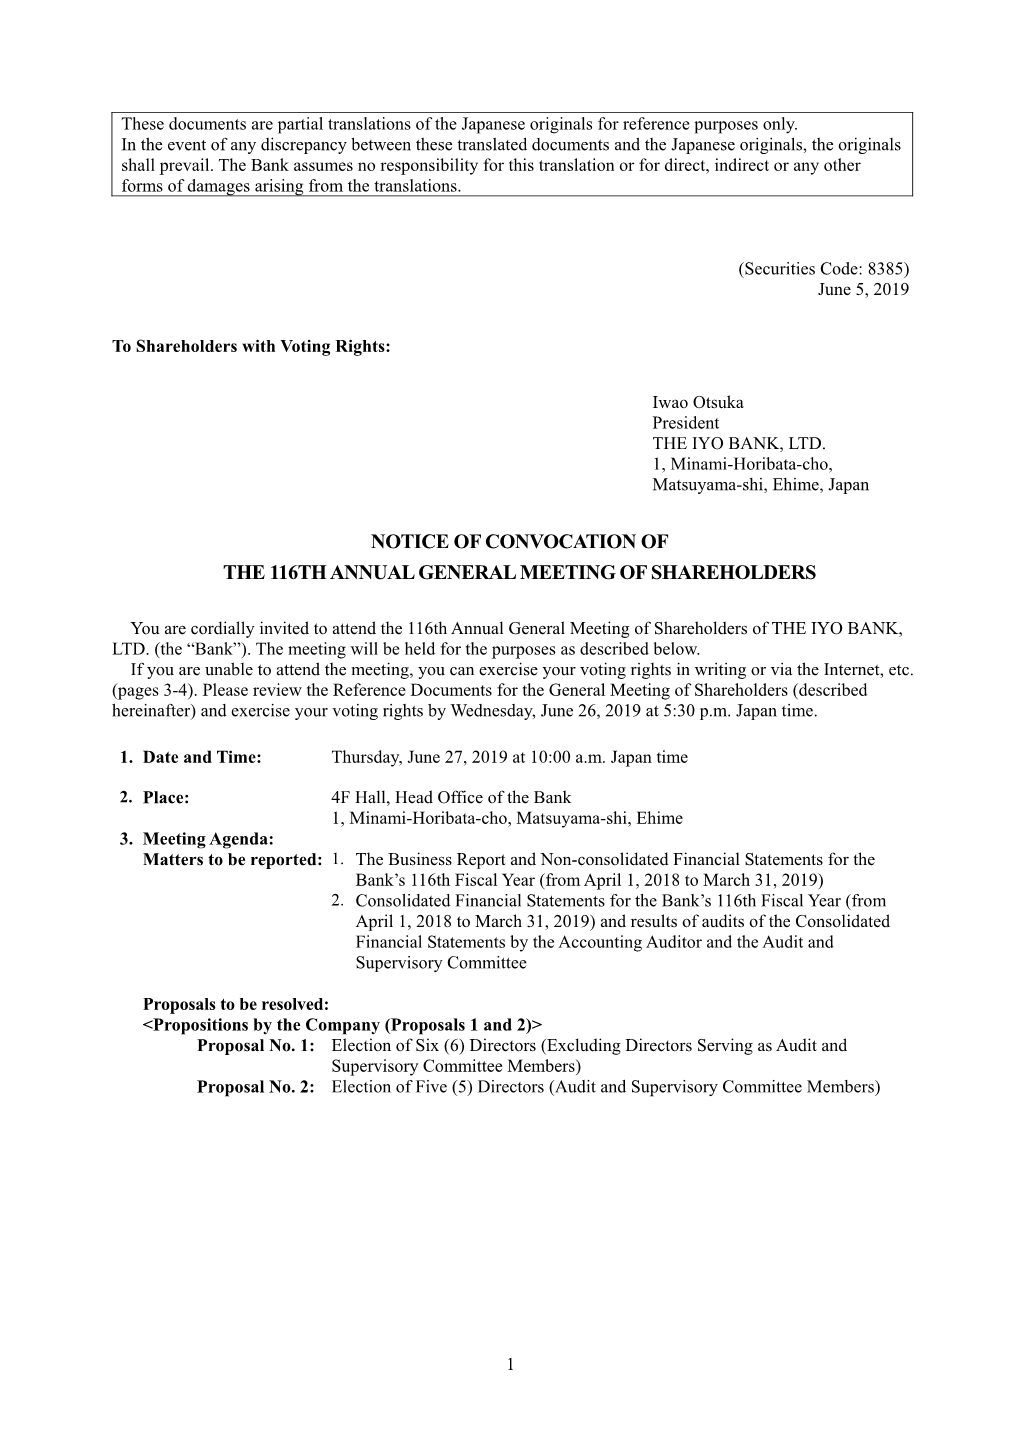 Notice of Convocation of the 116Th Annual General Meeting of Shareholders